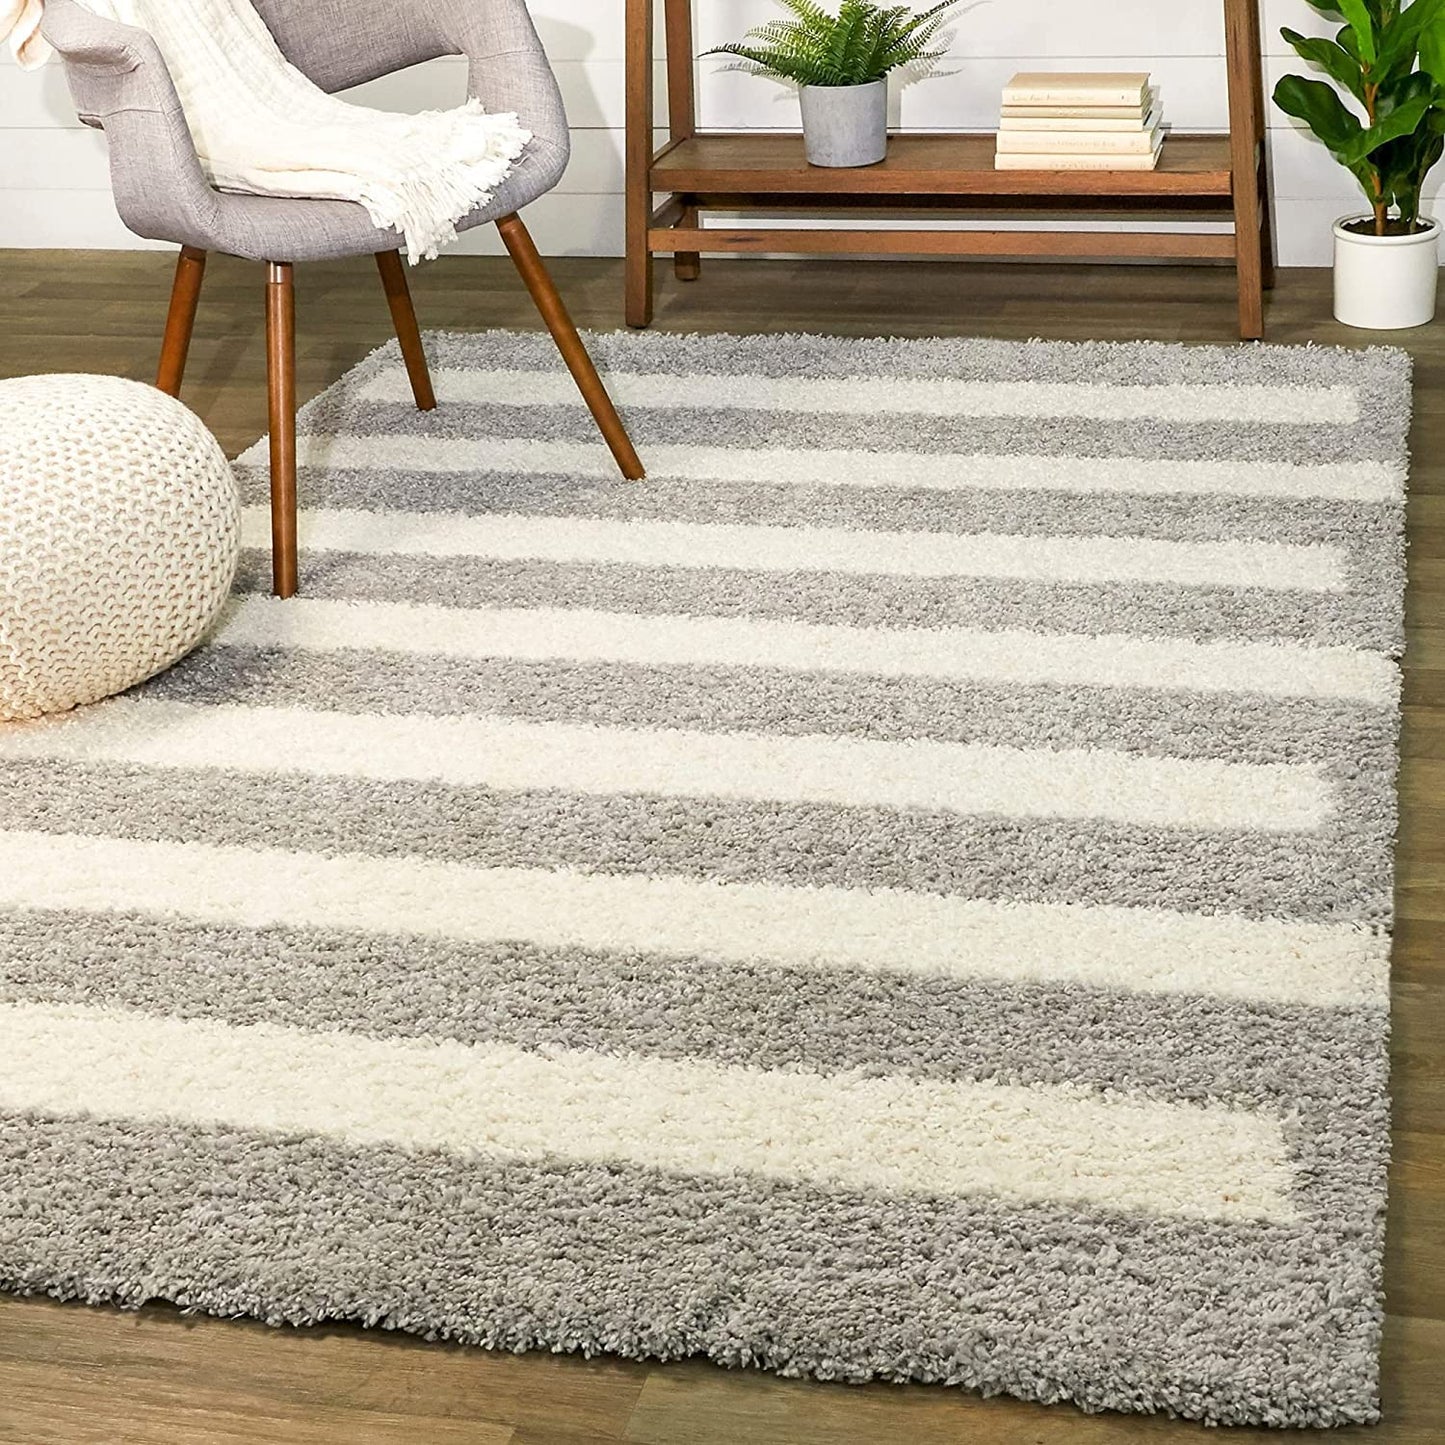 Kashyapa Rugs Collection - Ivory With Grey Shaggy Rug For Soft touch Microfiber Hand tufted Carpet